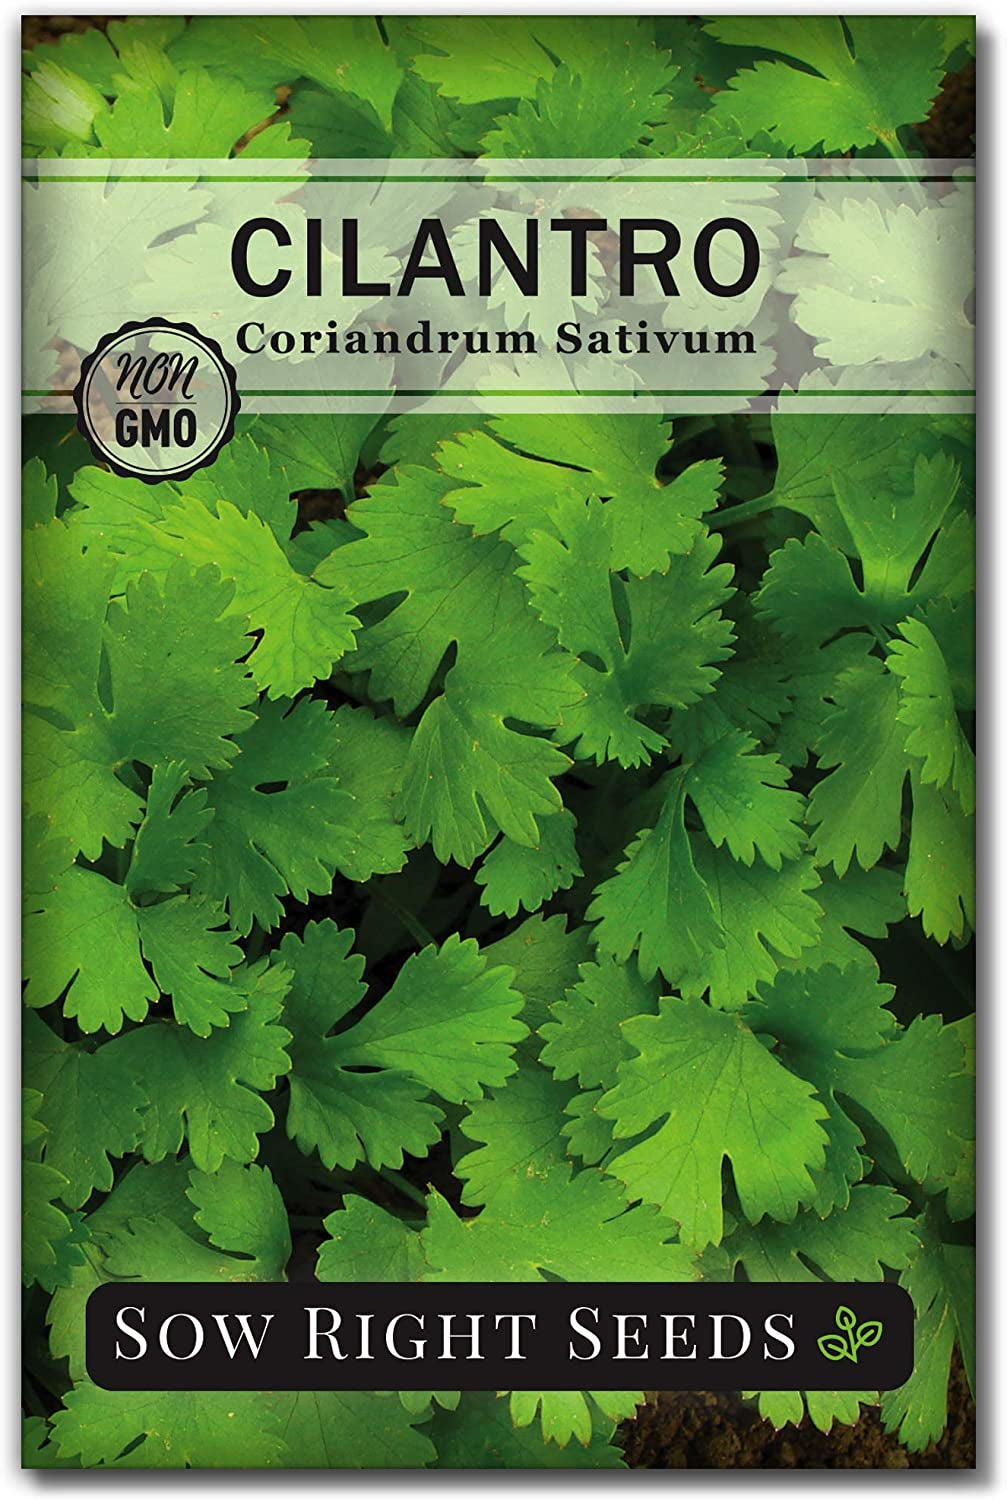 - Cilantro Seeds for Planting - Non-Gmo Heirloom Packet with Instructions to Grow a Kitchen Herb Garden - Great Addition to Your Cooking - Make Coriander Seasoning - Zesty Herb (1)